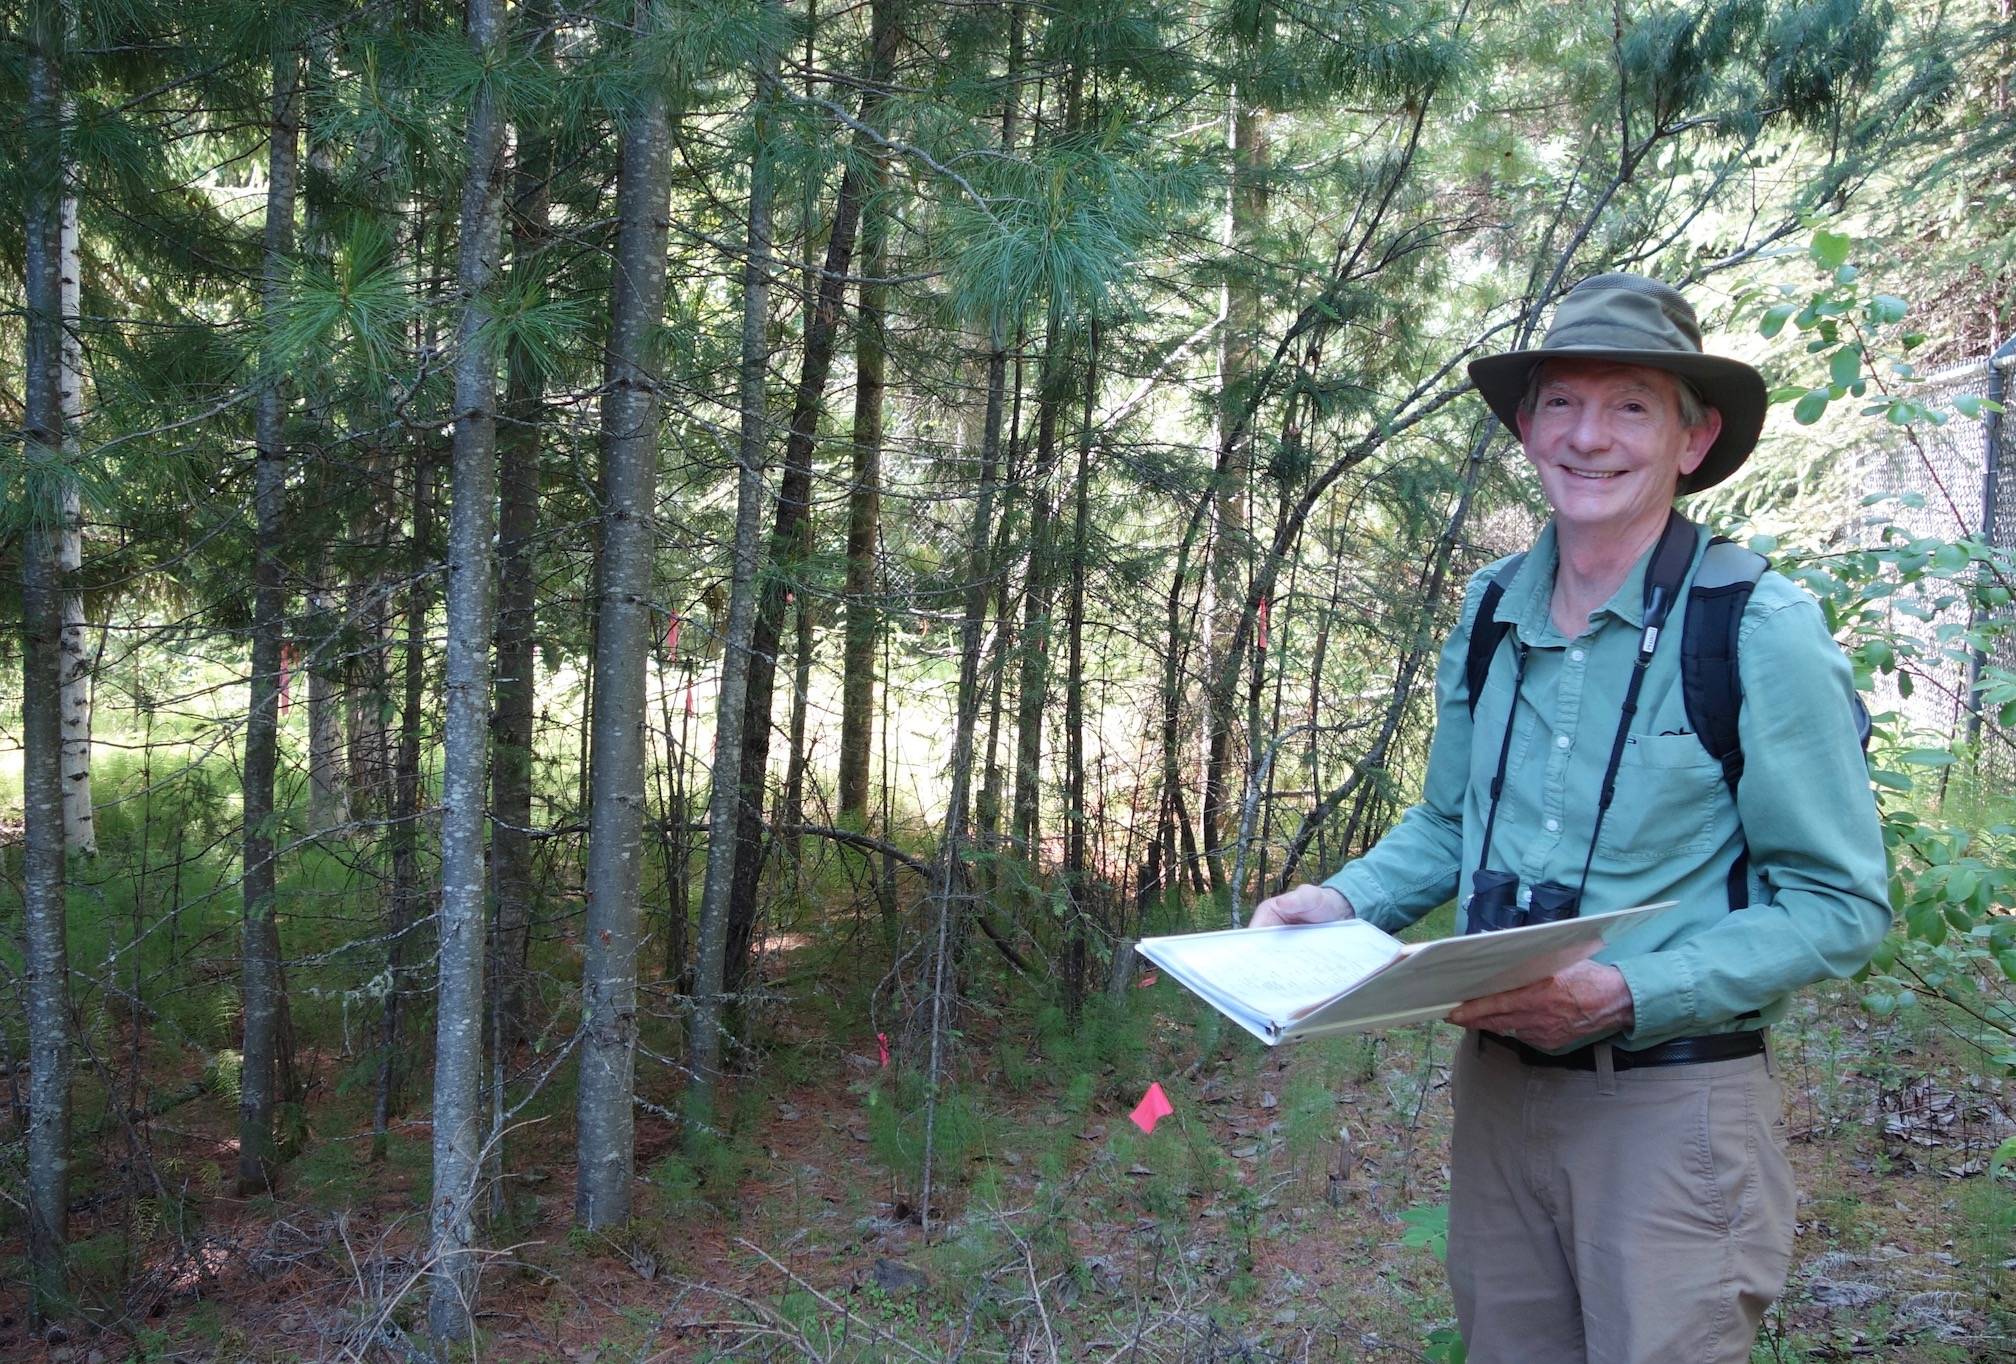 Artist and UAF professor emeritus Kes Woodward in a stand of exotic trees on the Fairbanks campus. (Courtesy Photo / Ned Rozell)